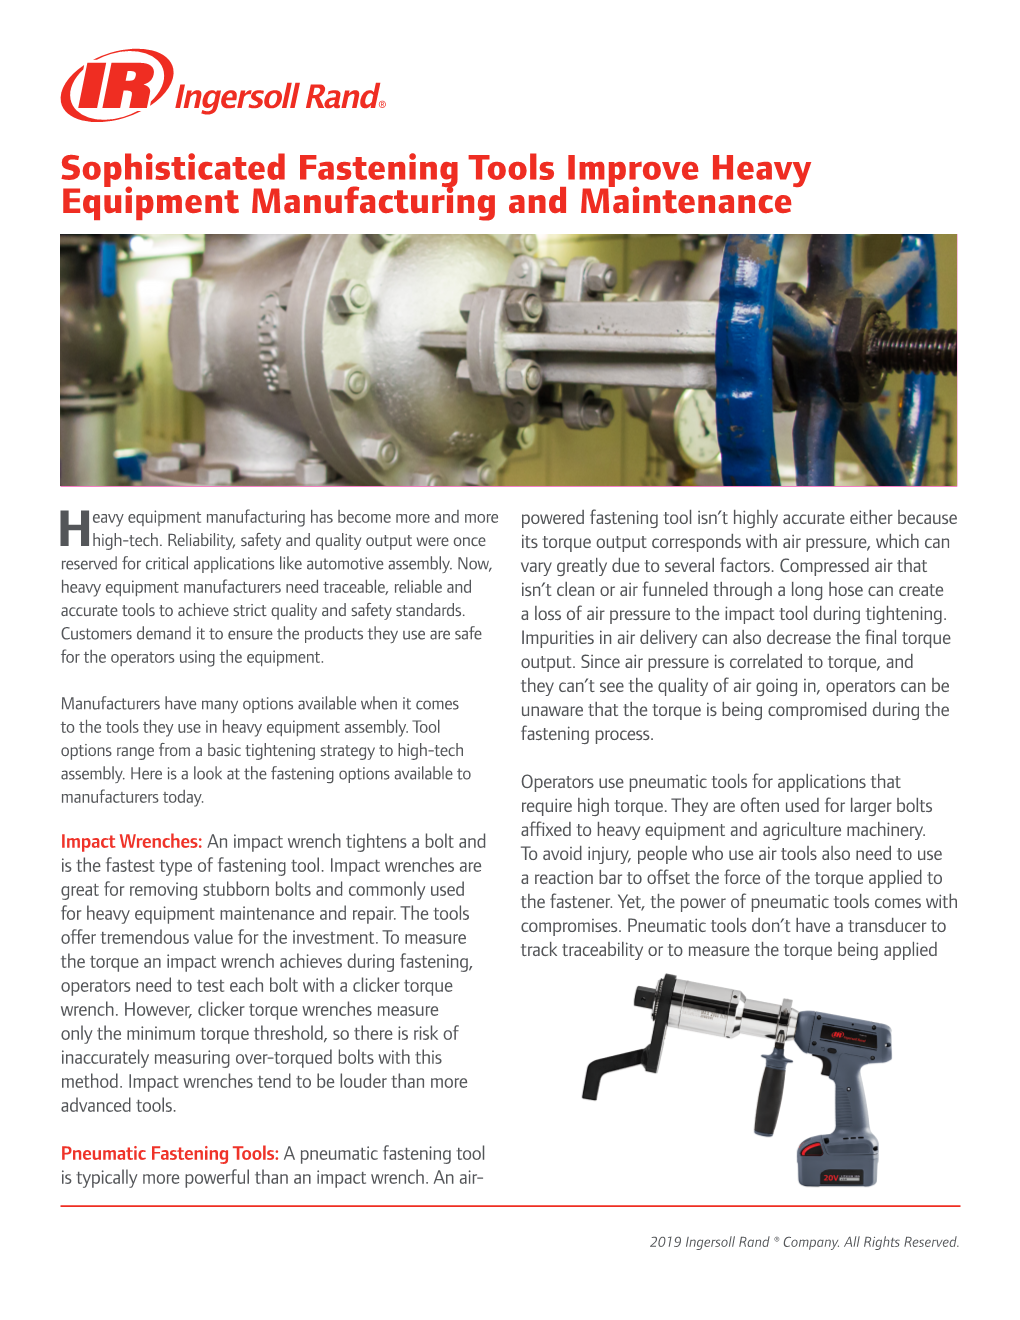 Sophisticated Fastening Tools Improve Heavy Equipment Manufacturing and Maintenance